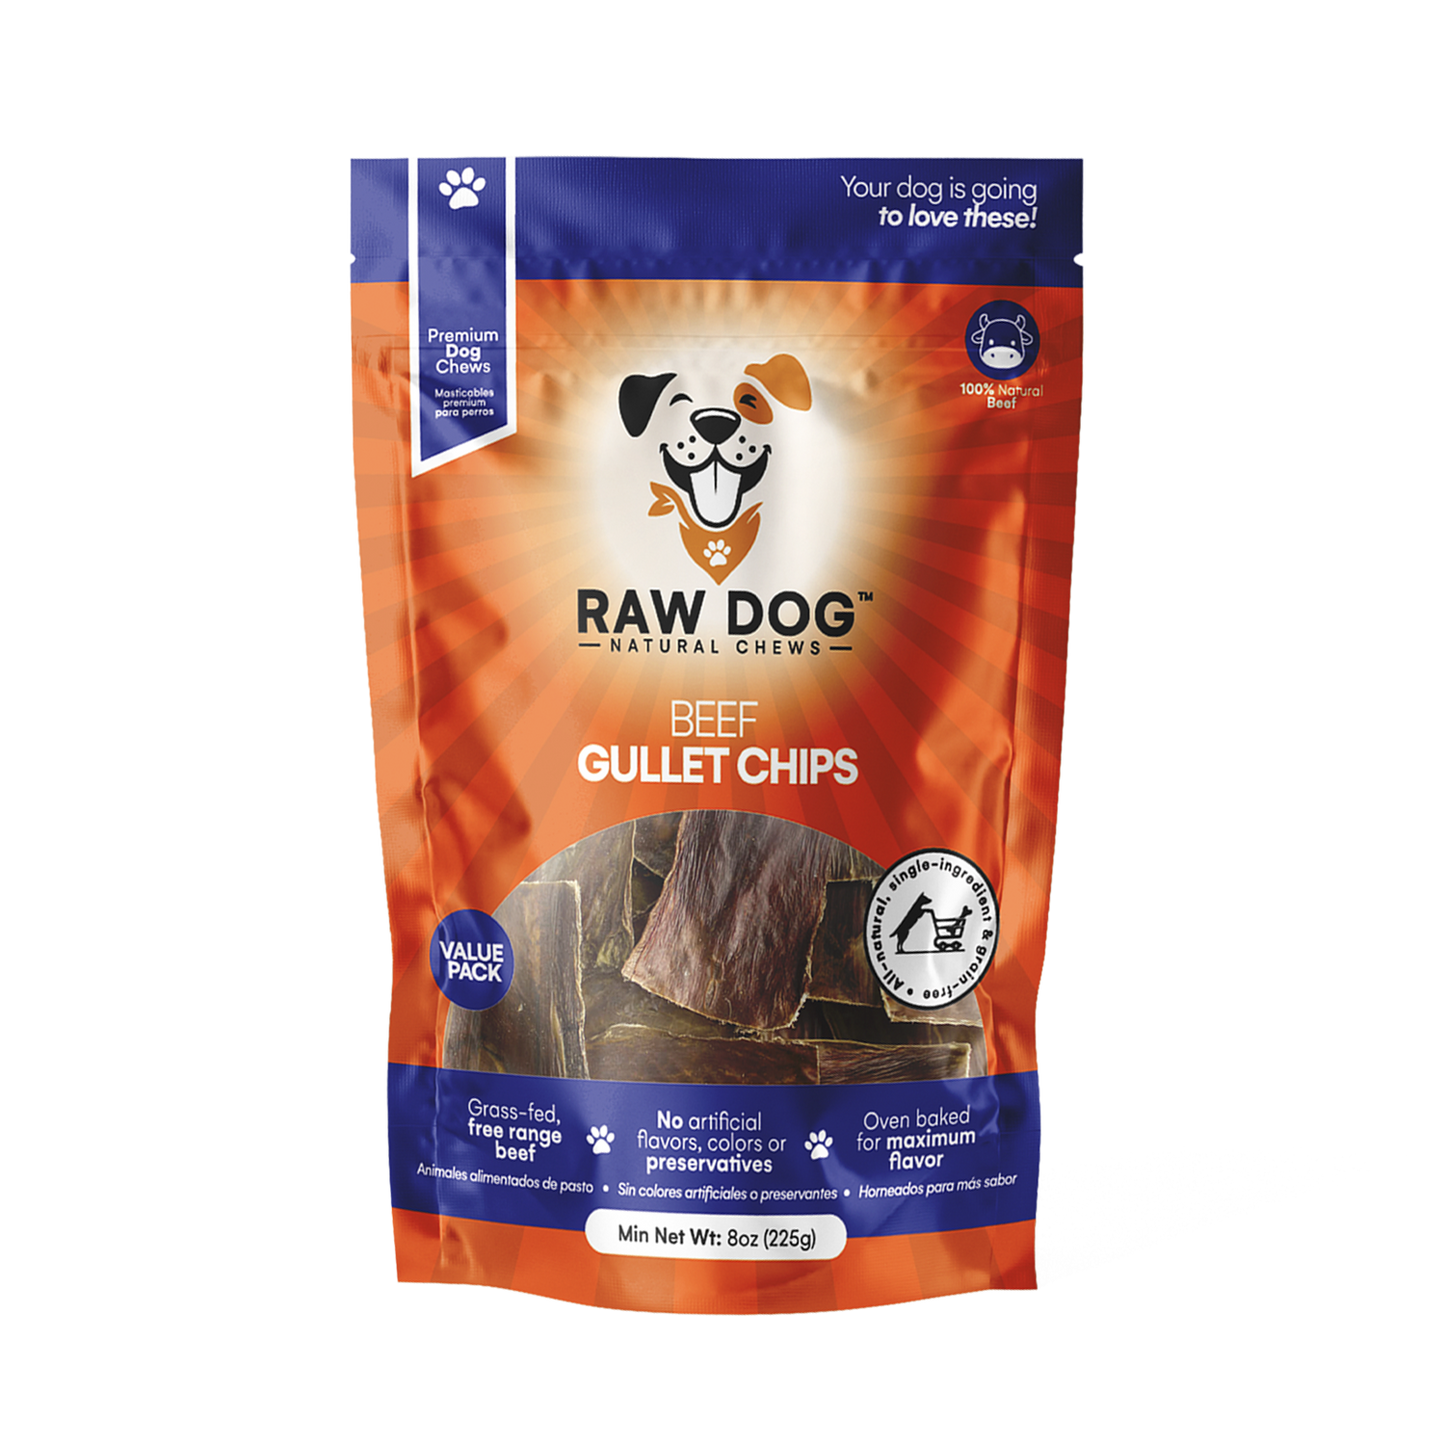 Beef Gullet Chips - Raw Dog Chews